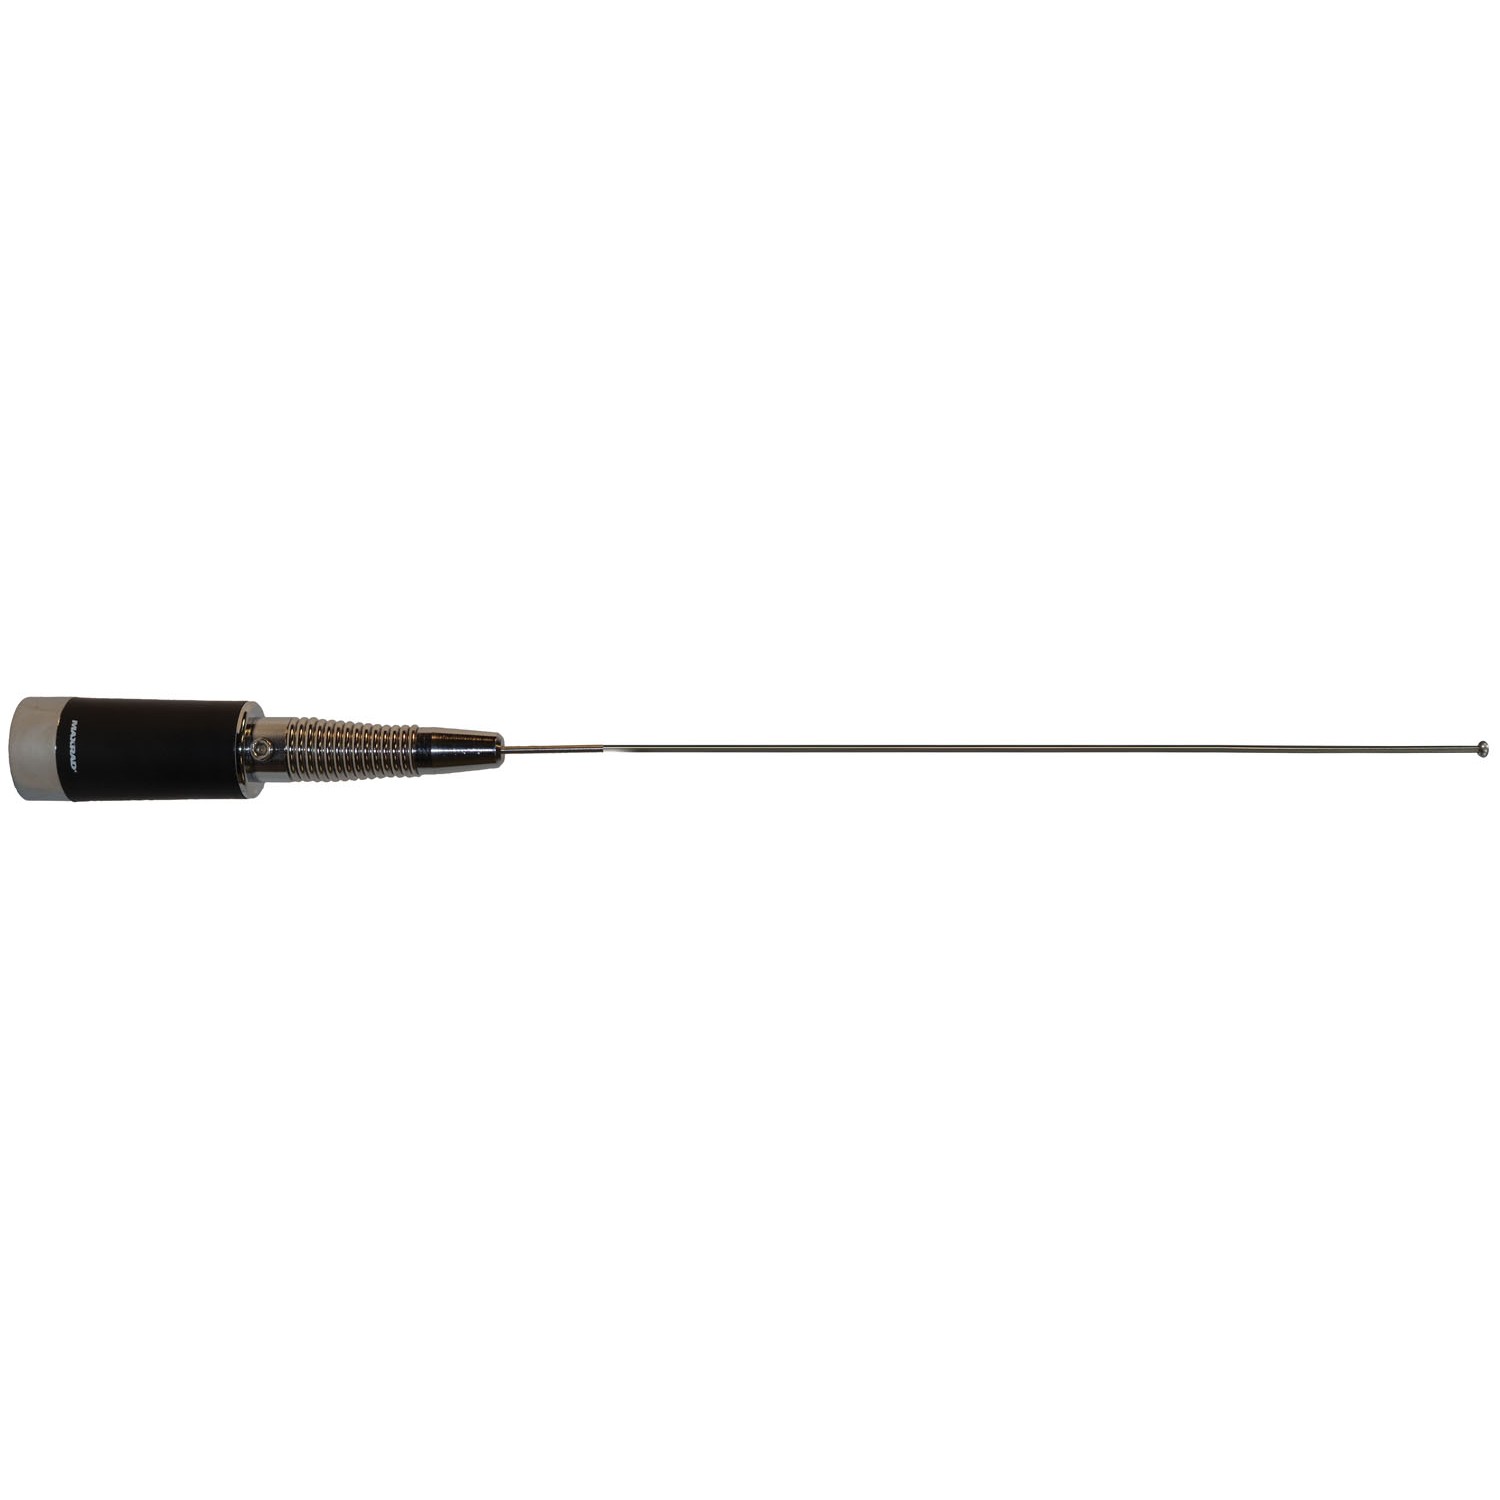 30-46Mhz Base Load Antenna With Spring